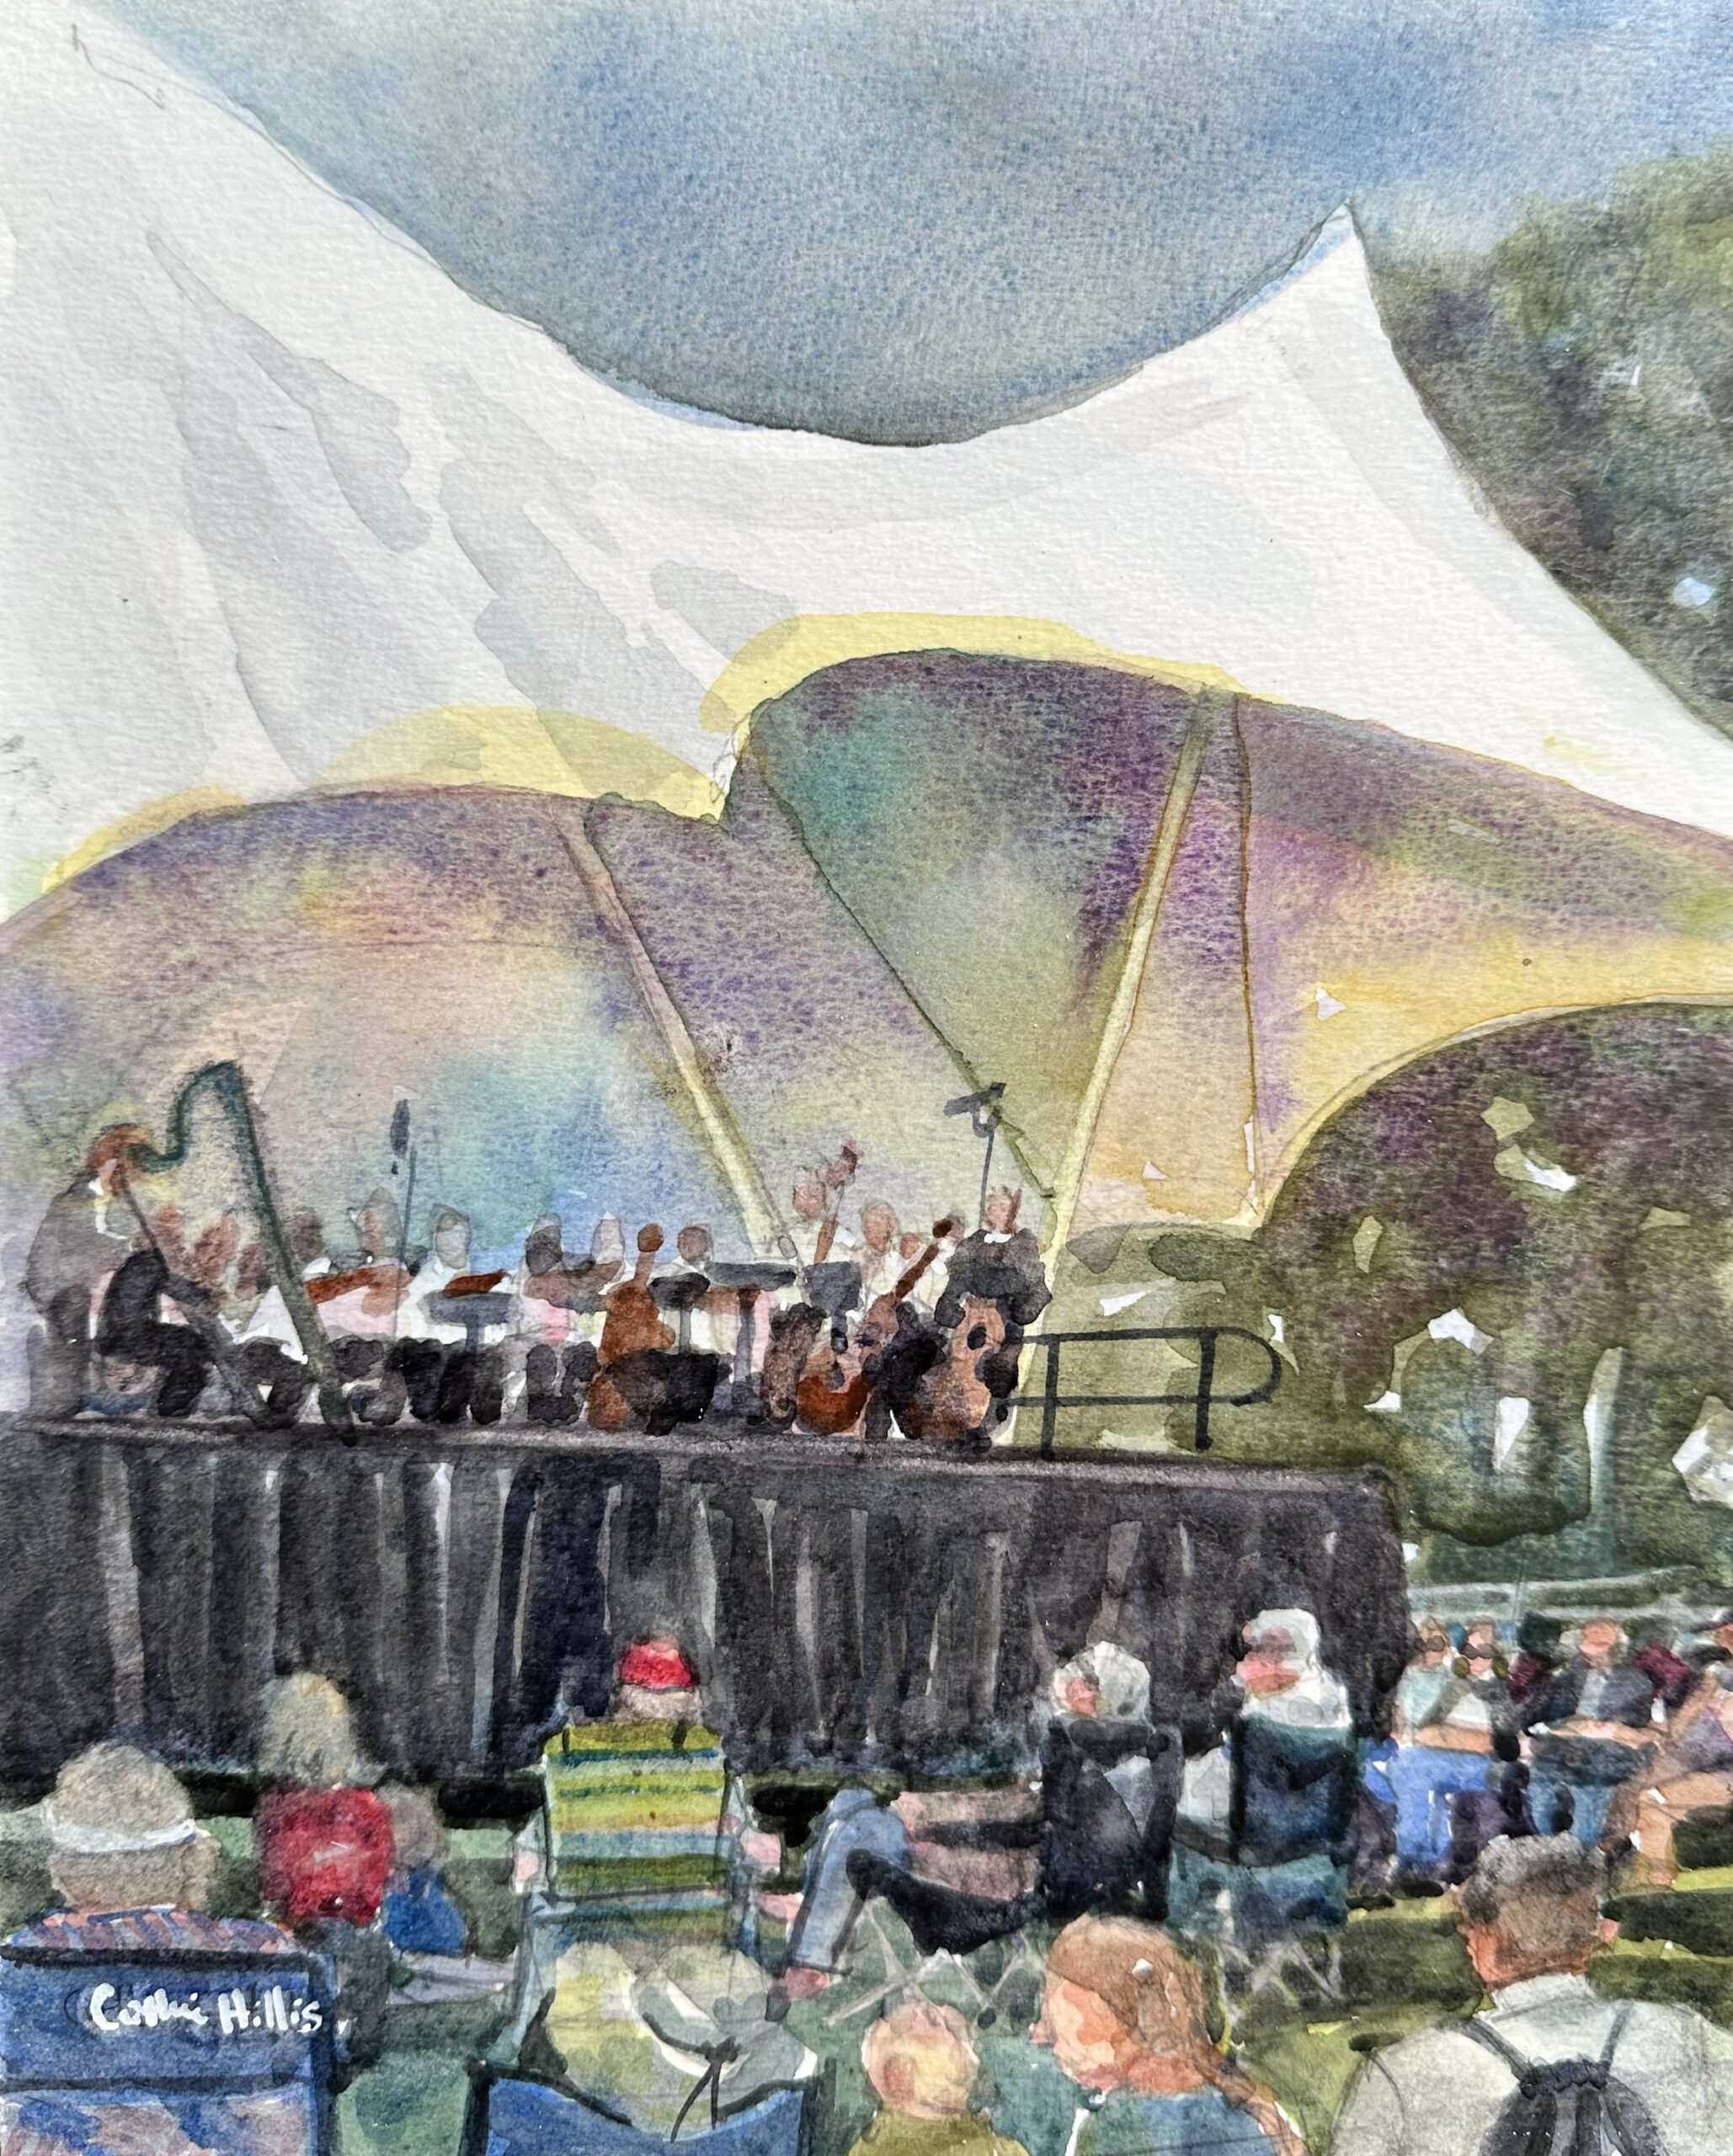 “A Little Night Music in Virginia” by Catherine Hillis, 2023, watercolor, 10 x 8 in., Available from artist, Plein air